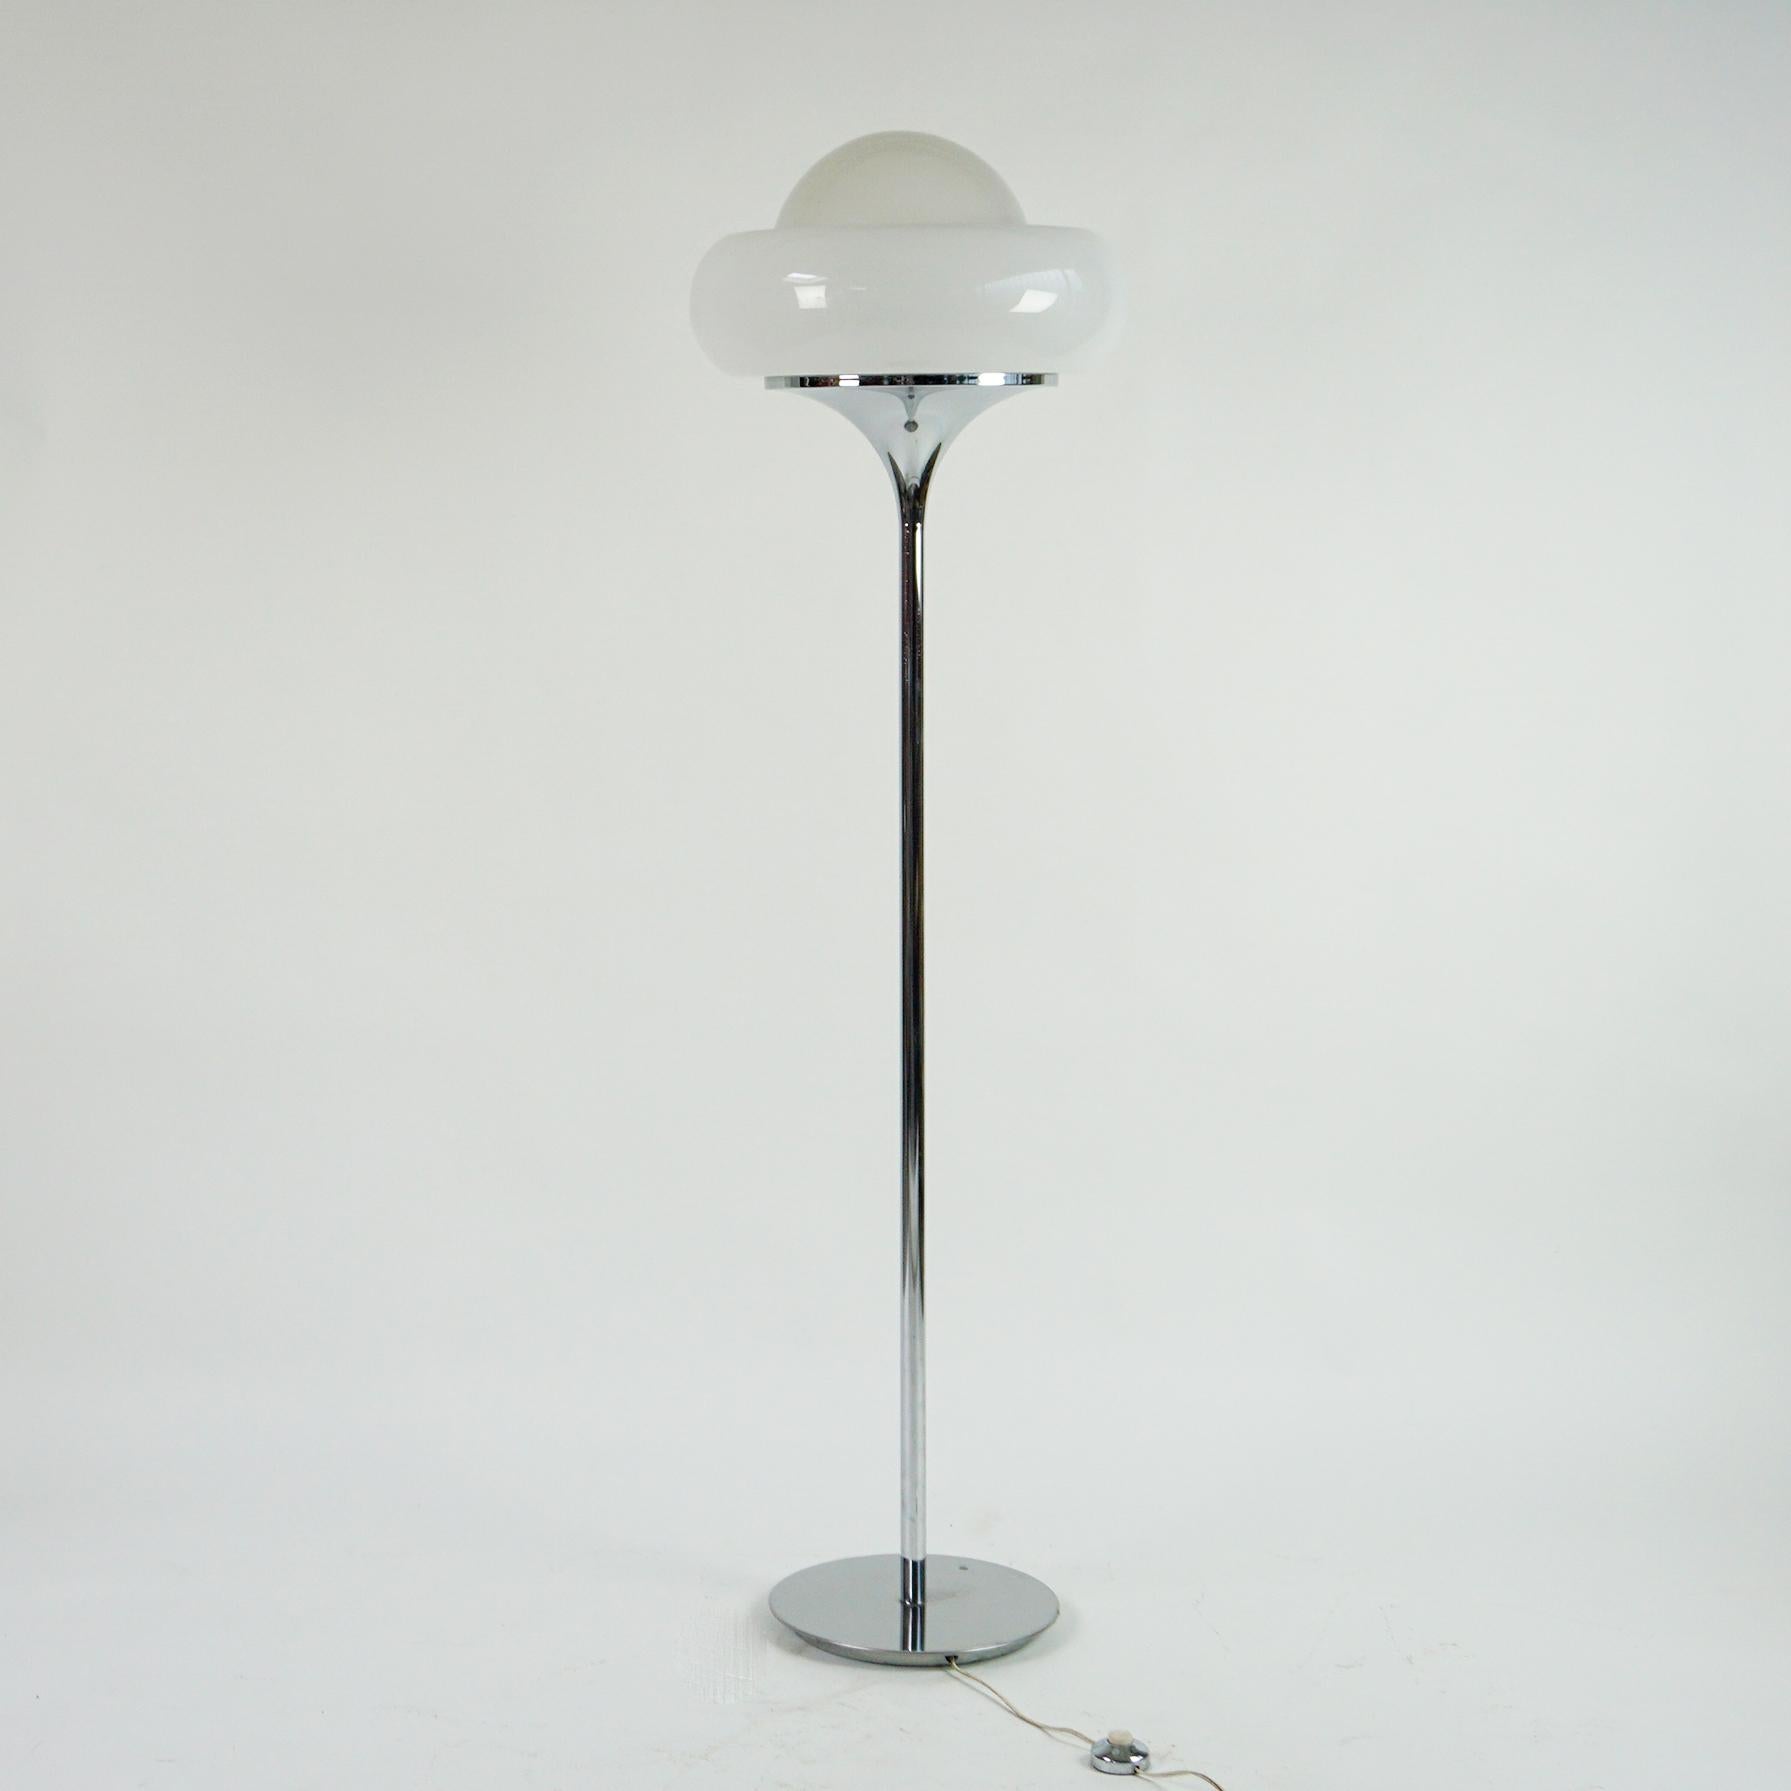 This iconic large Italian Floor lamp is designed by Harvey Guzzini for Guzzini in the 1960s, 
Chromed metal round base with a cast iron counterweight inside. Long chrome rod. Chrome round conical lampshade holder, white perspex shade with white